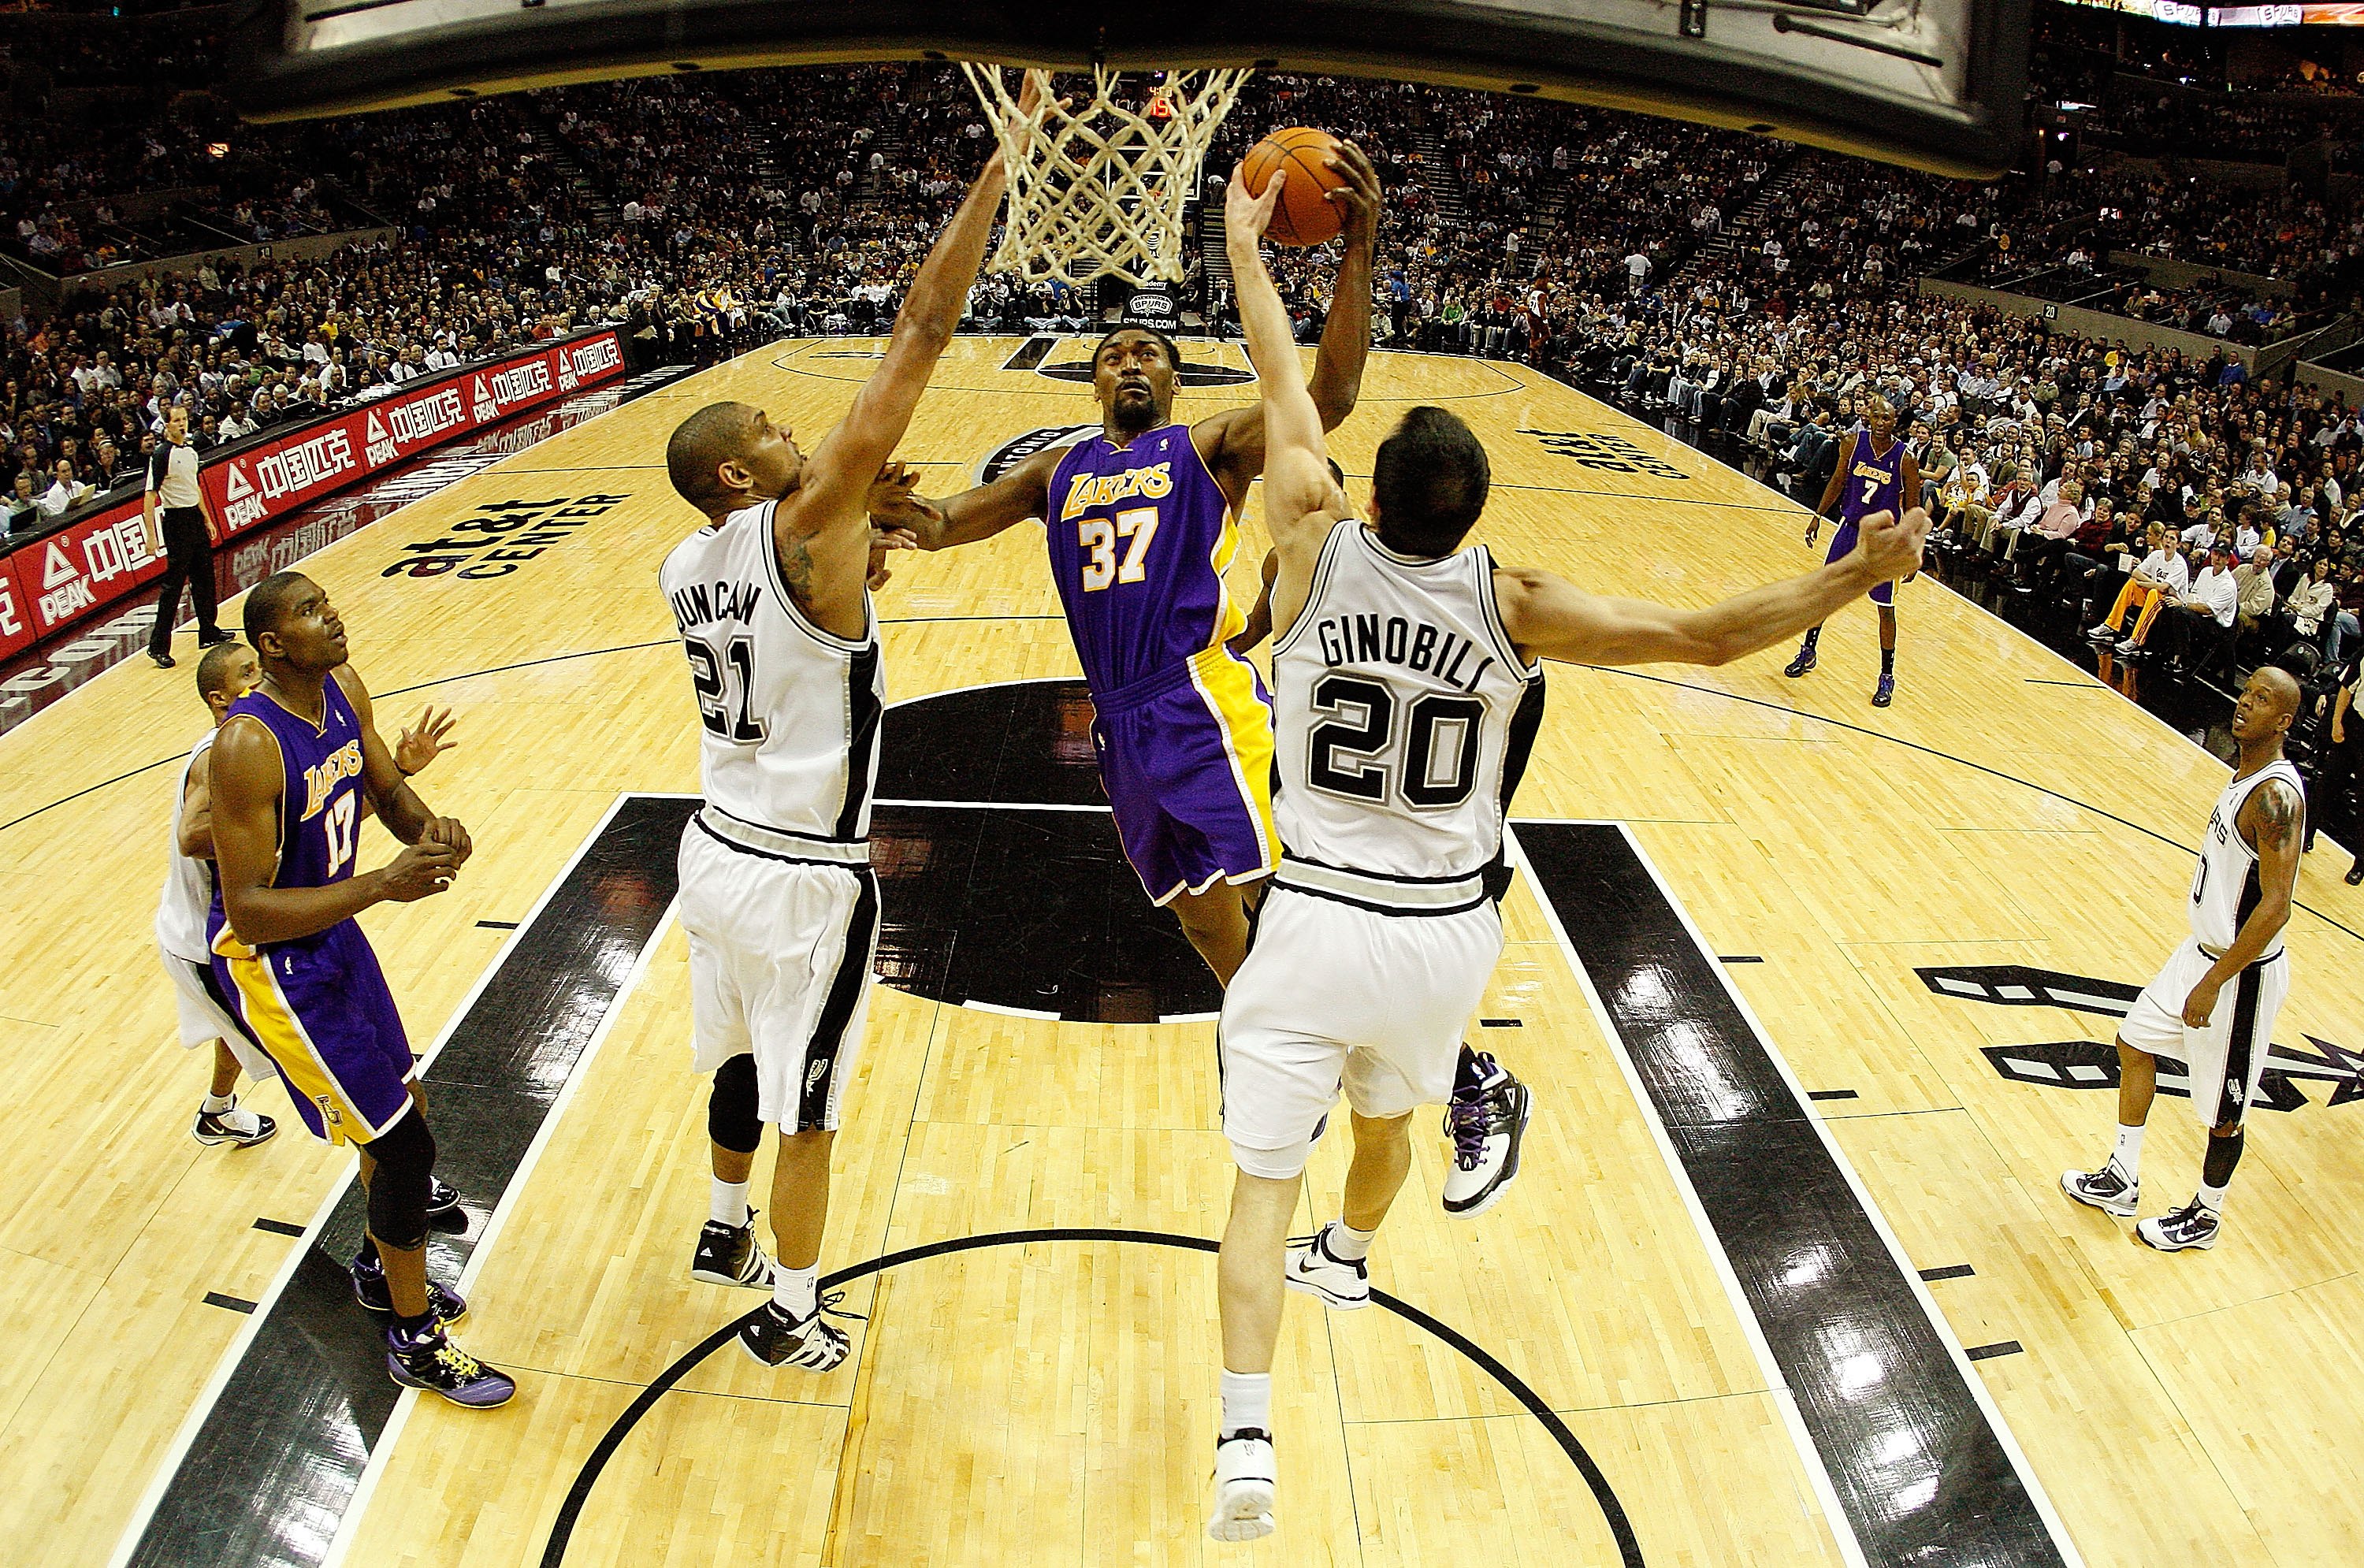 SAN ANTONIO - JANUARY 12:  Forward Ron Artest #37 of the Los Angeles Lakers takes a shot against Tim Duncan #21 and Manu Ginobili #20 of the San Antonio Spurs on January 12, 2010 at AT&T Center in San Antonio, Texas.  NOTE TO USER: User expressly acknowle